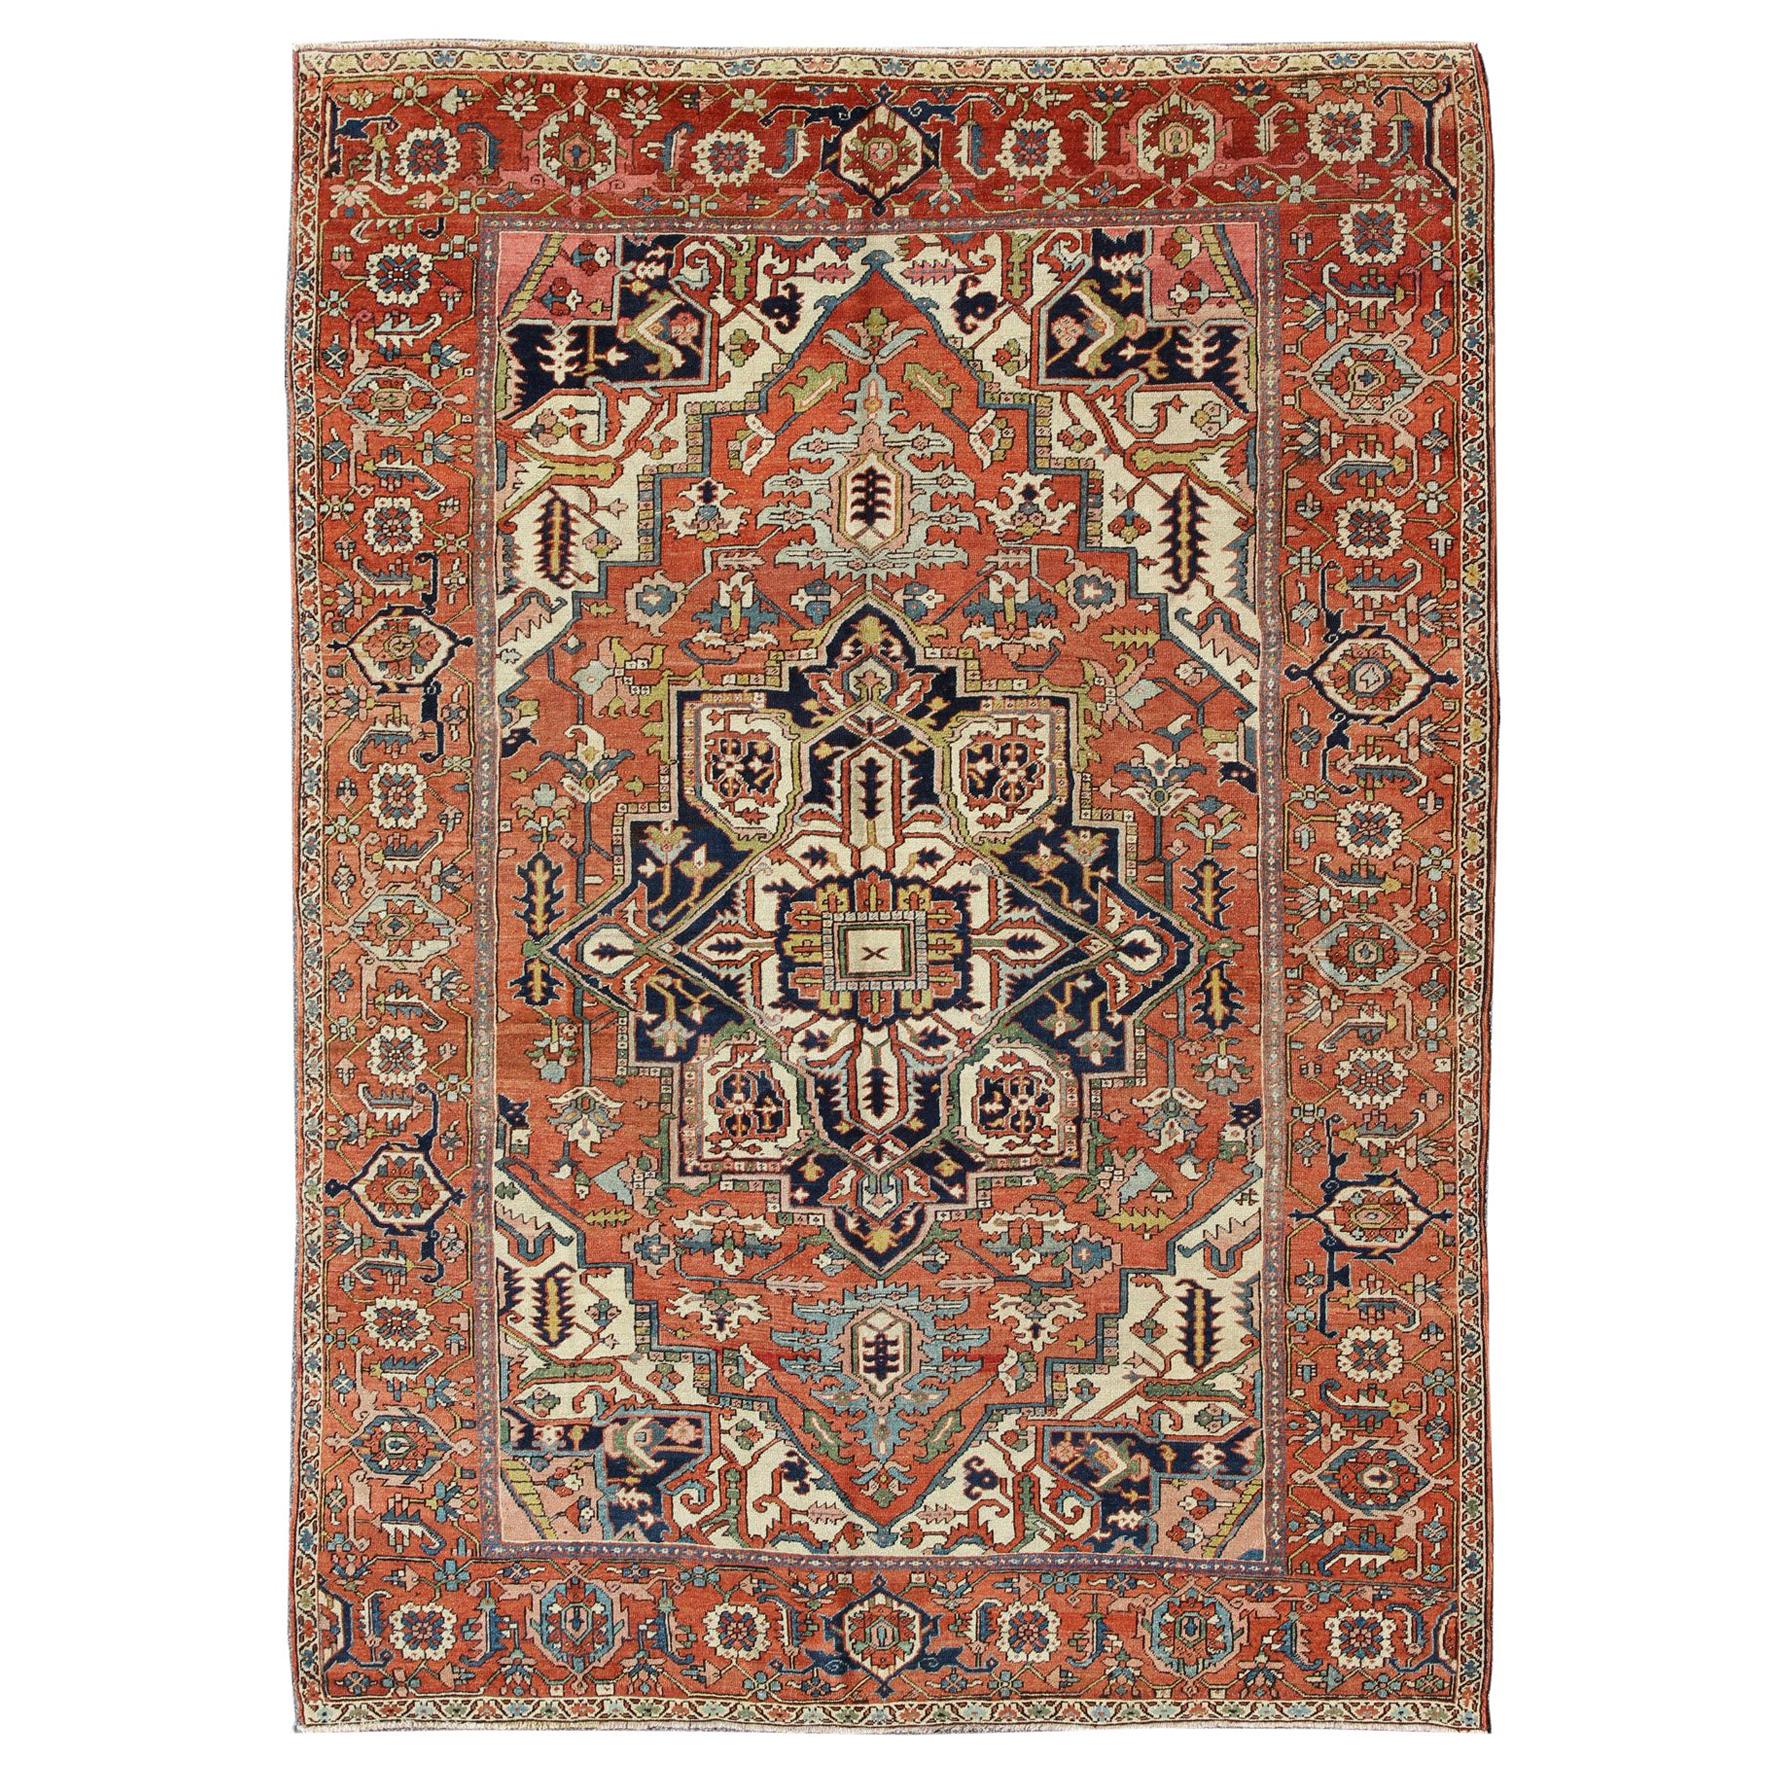 Antique Persian Serapi Rug with Bold Medallion in Orange, Navy Blue and Green